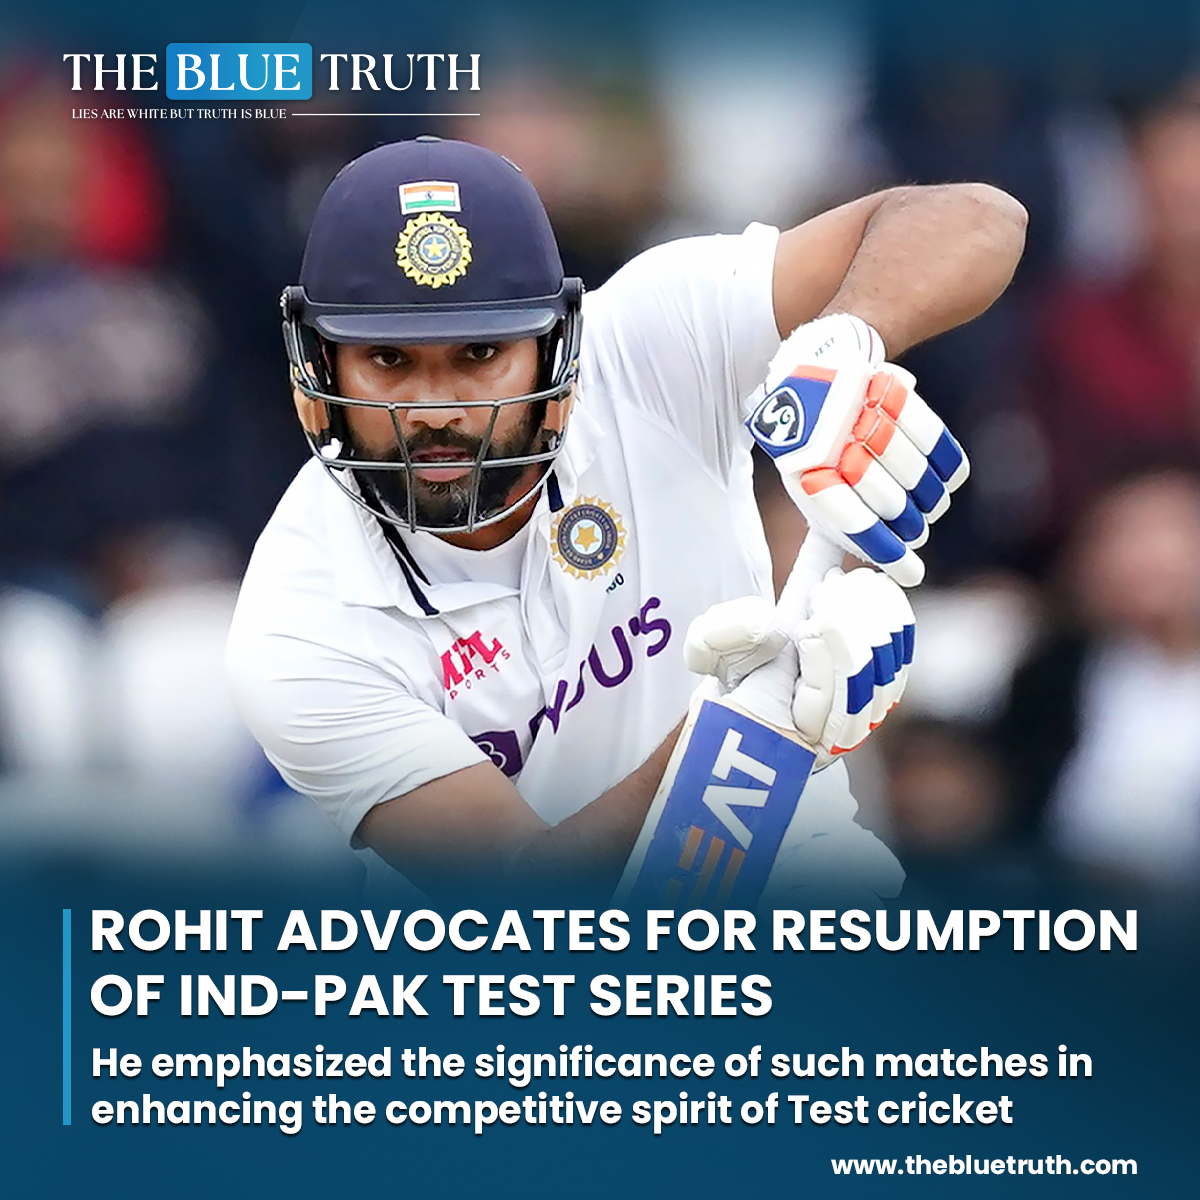 Indian cricket team captain Rohit Sharma has voiced his enthusiasm for the revival of Test cricket encounters between India and Pakistan.
#RohitSharma #IndoPak #Cricket #TestSeries #SportsDiplomacy #tbt #TheBlueTruth